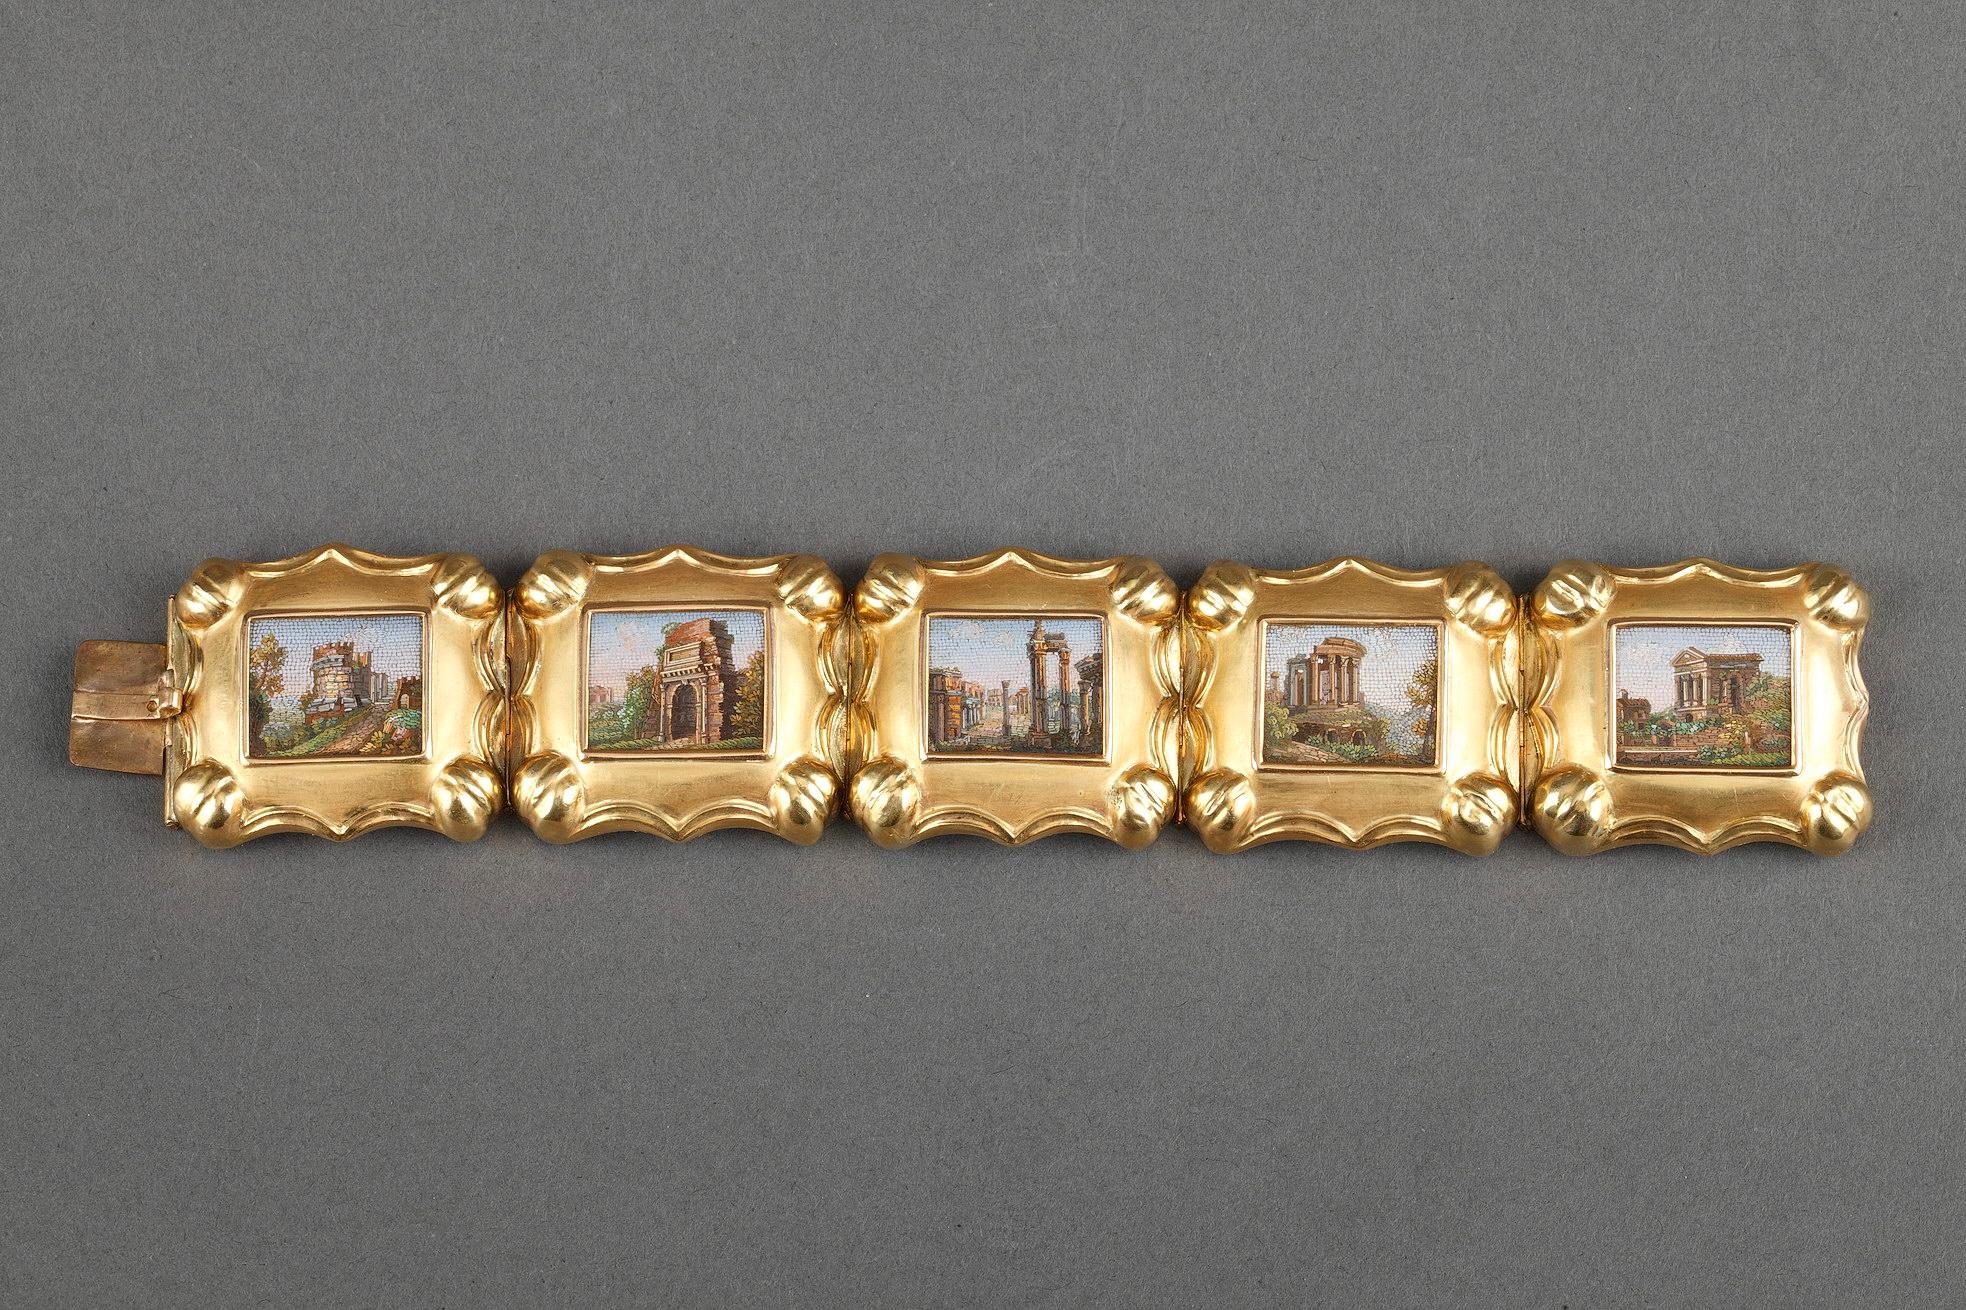 Articulated bracelet composed of five micromosaic medallions framed in sculpted gold. The micromosaic plates represent views of various famous Roman monuments. 

Length 6.7 in (17 cm) 

First half of the 19th century work.